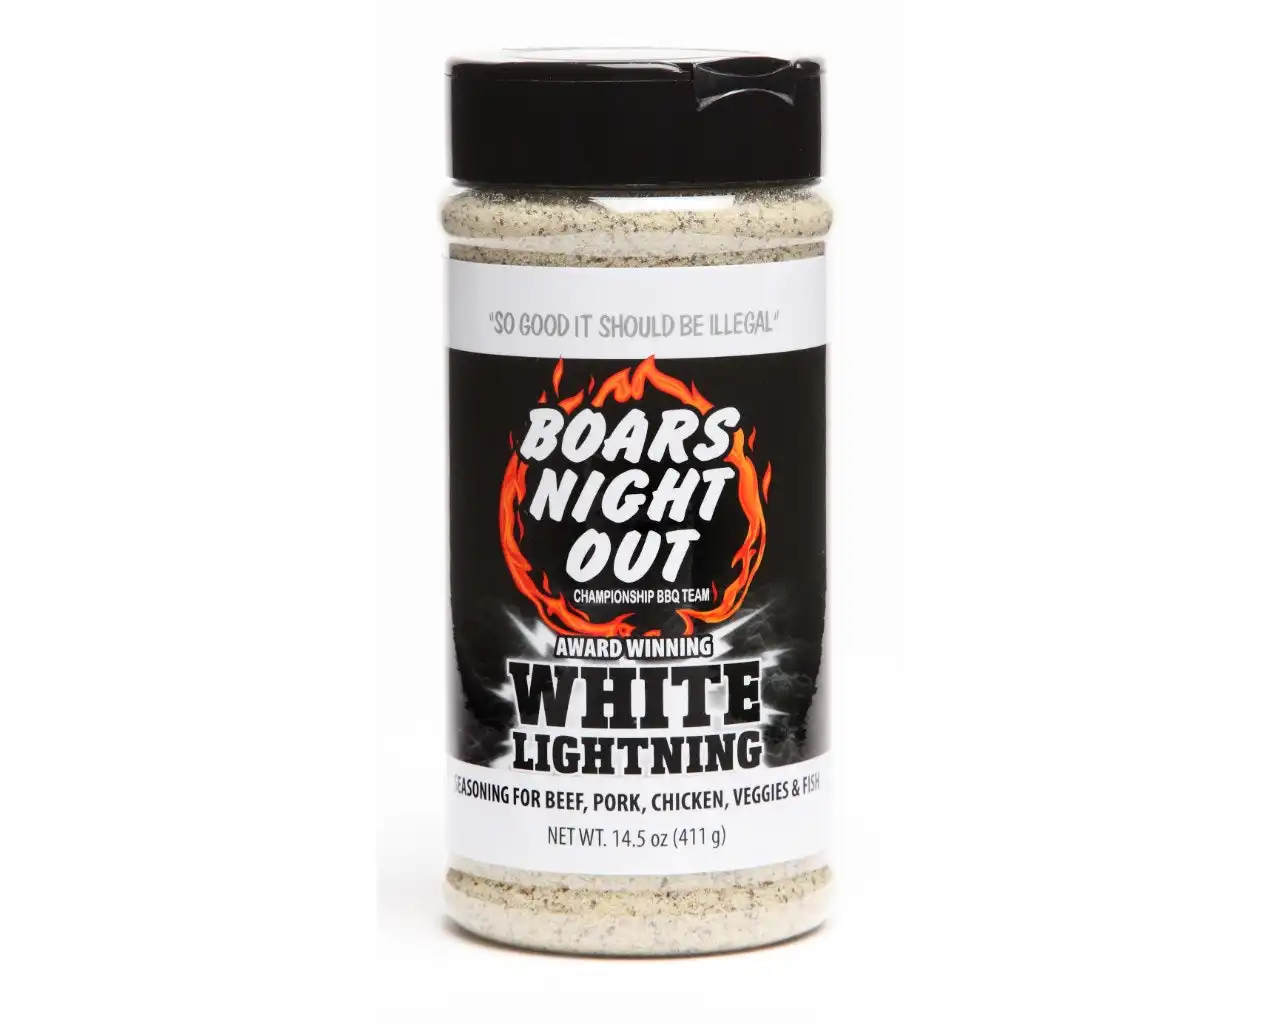 Boars Night Out White Lightning Jar